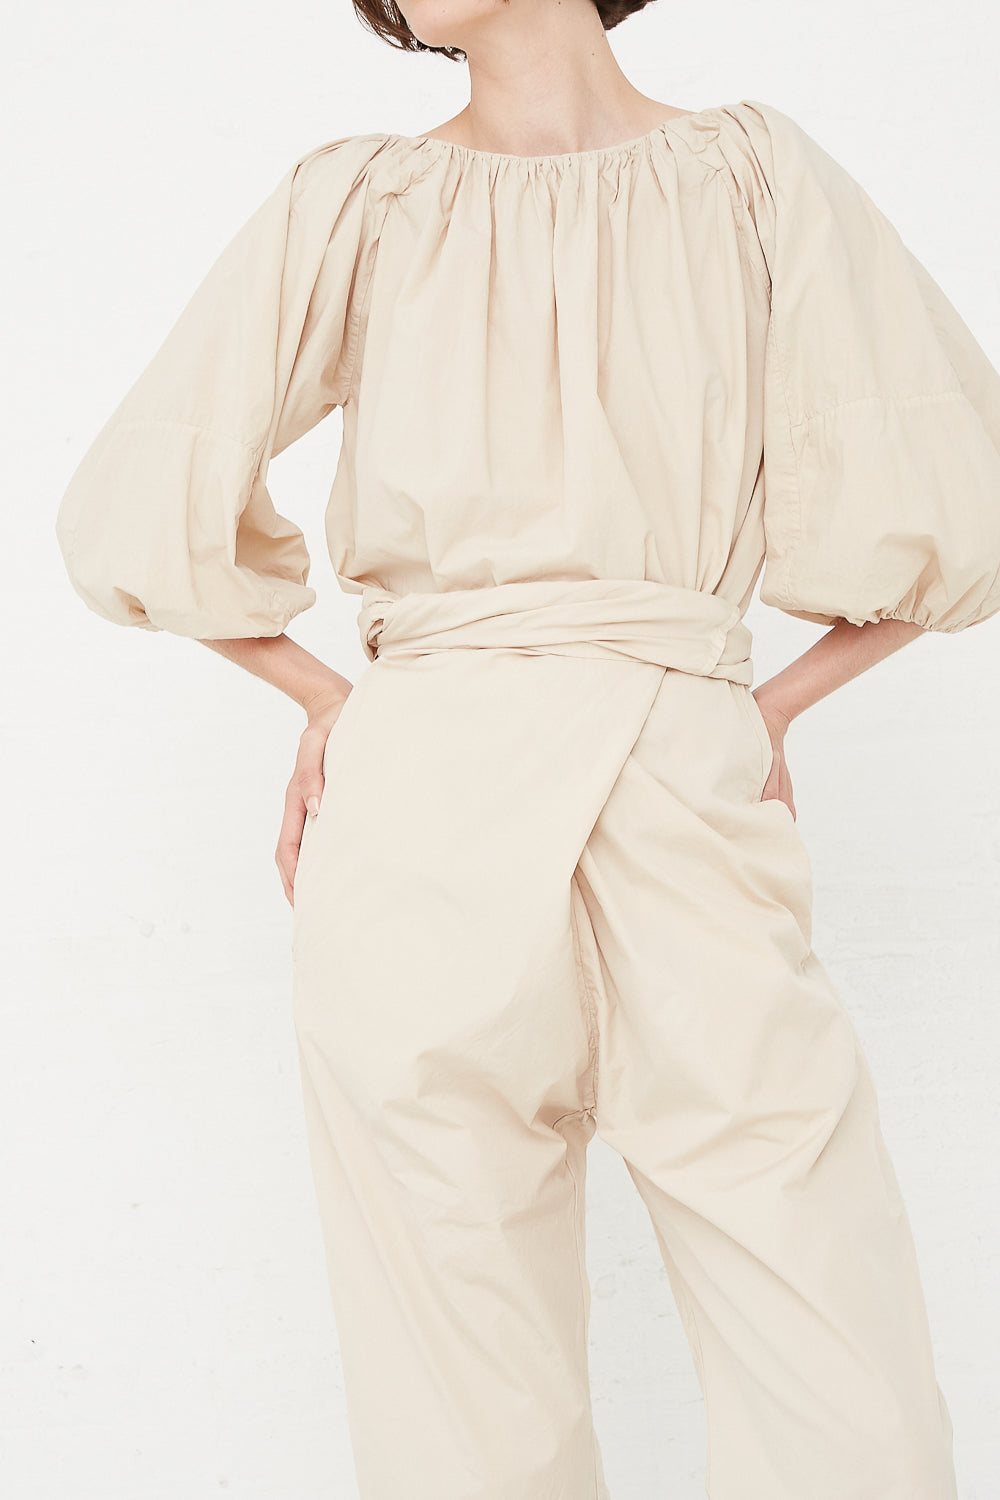 Cosmic Wonder - Suvin Cotton Broadcloth Wrap Pant in Beeswax front wrap detail